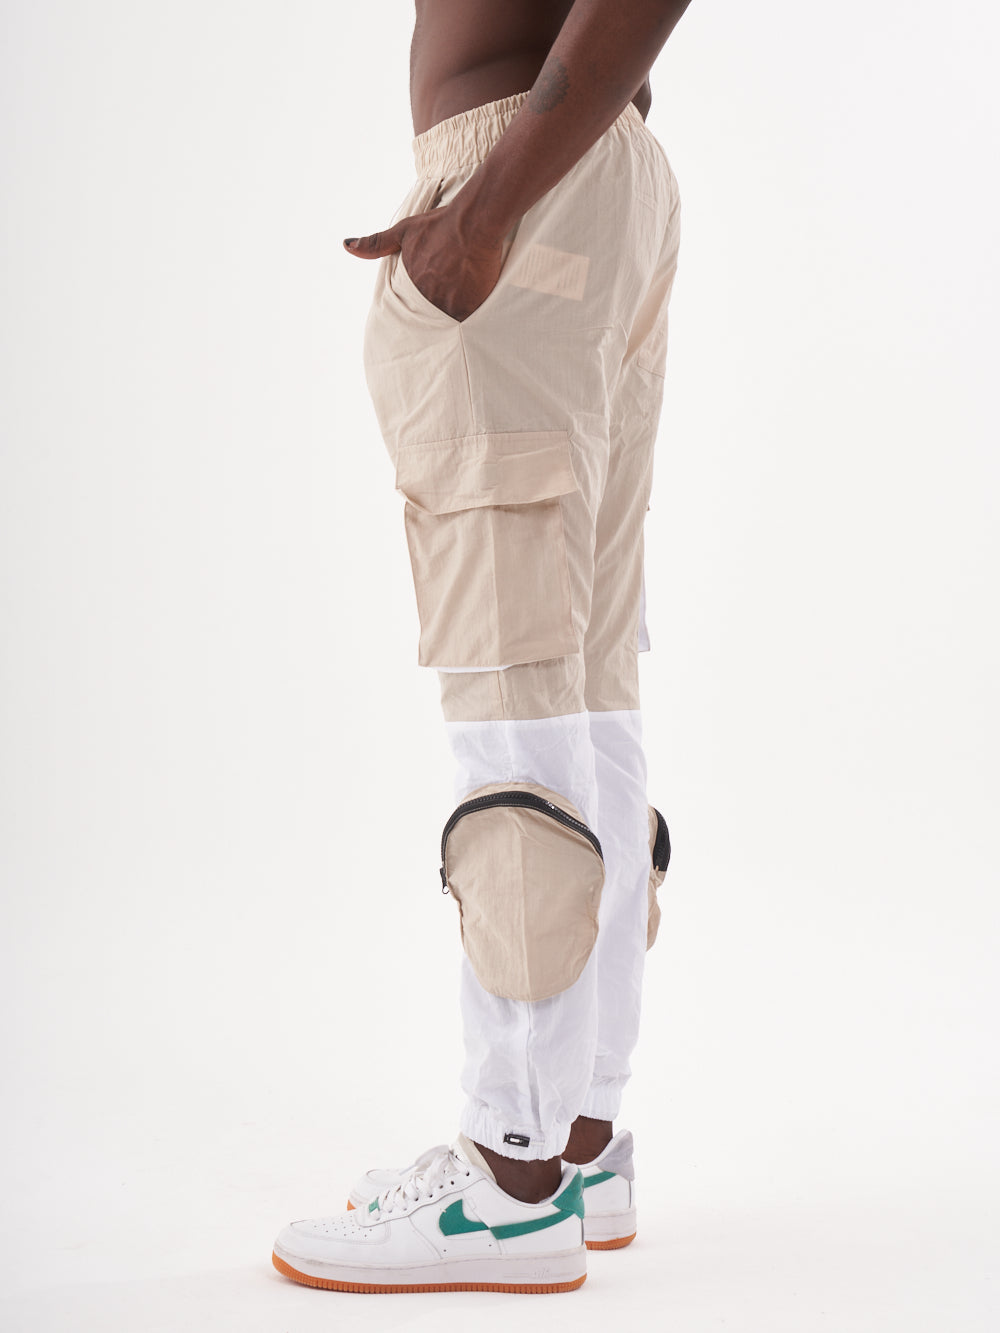 A man wearing the RENEGADE | BEIGE cargo pant and white sneakers.